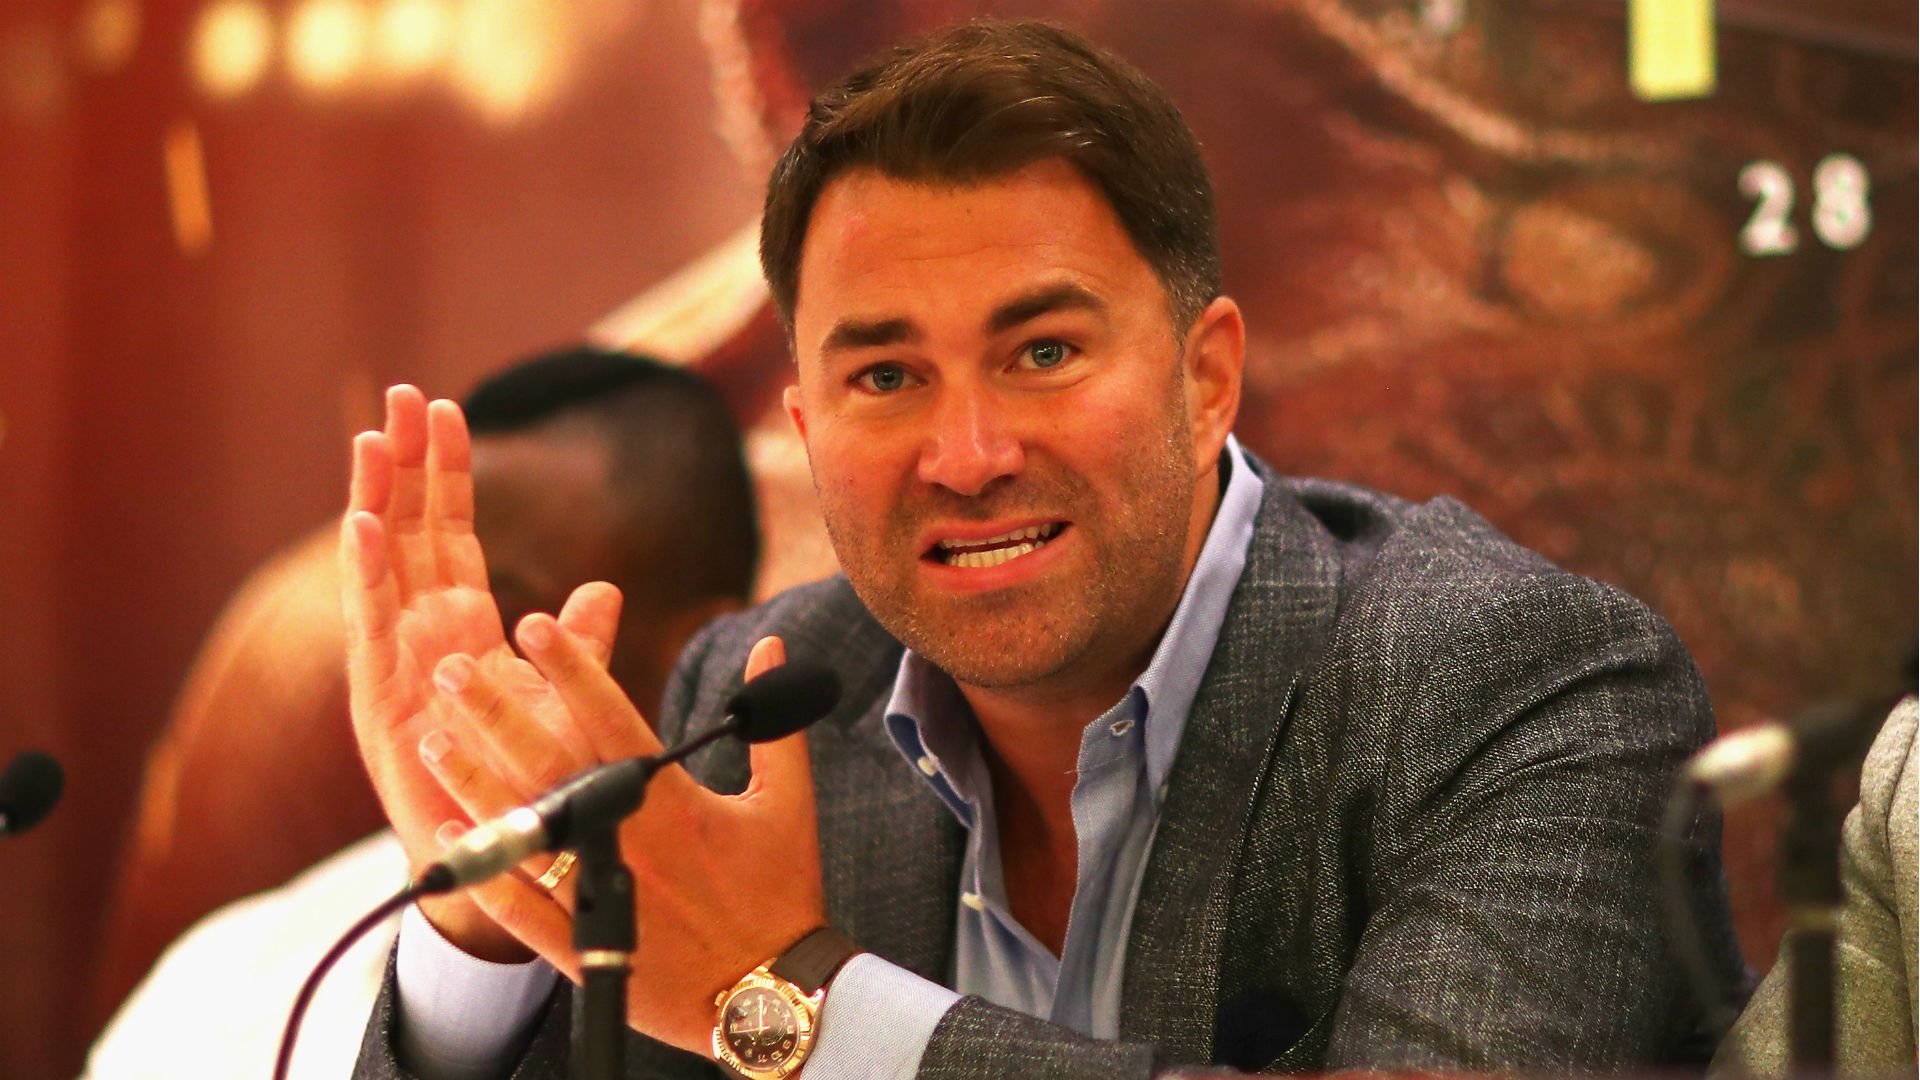 Eddie Hearn discusses Callum Smith’s performance, claims Beterbiev-Bivol is a done deal